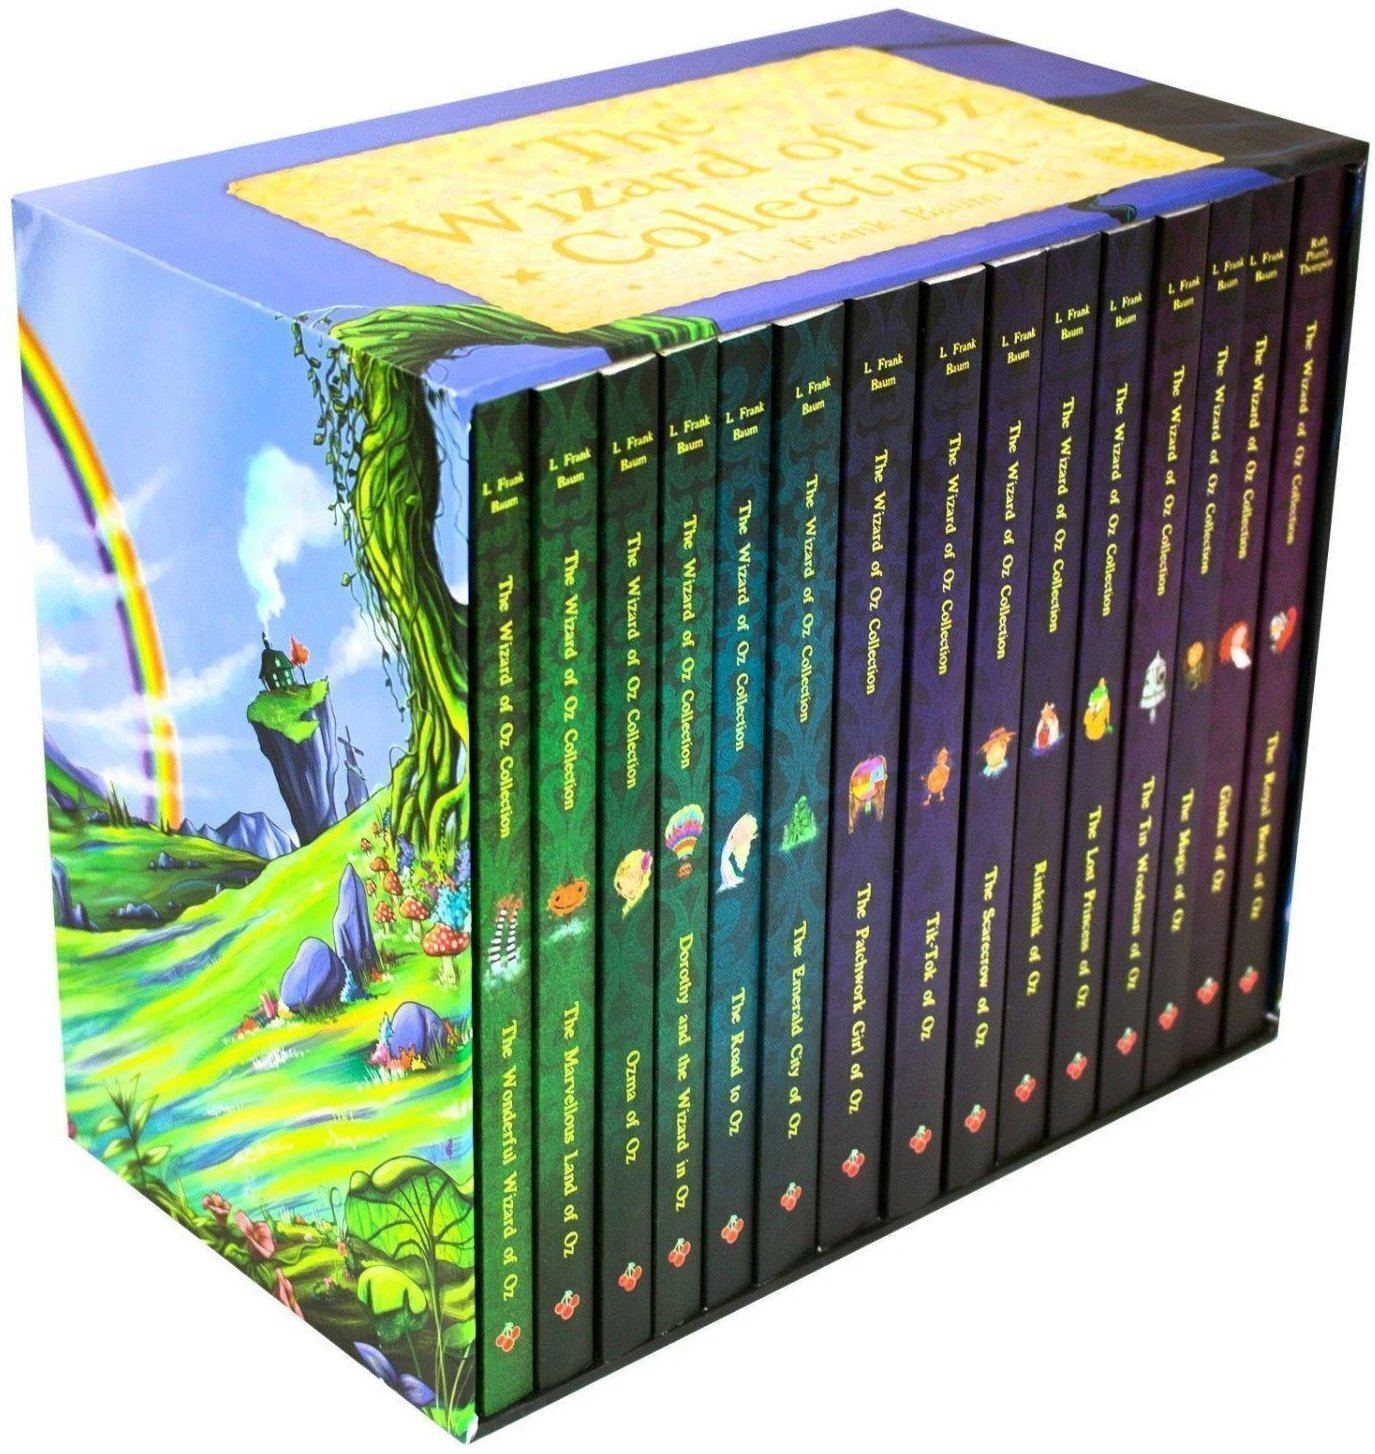 The Wizard of Oz Collection 15 Books Box Set by L. Frank Baum - Ages 9-14 - PB